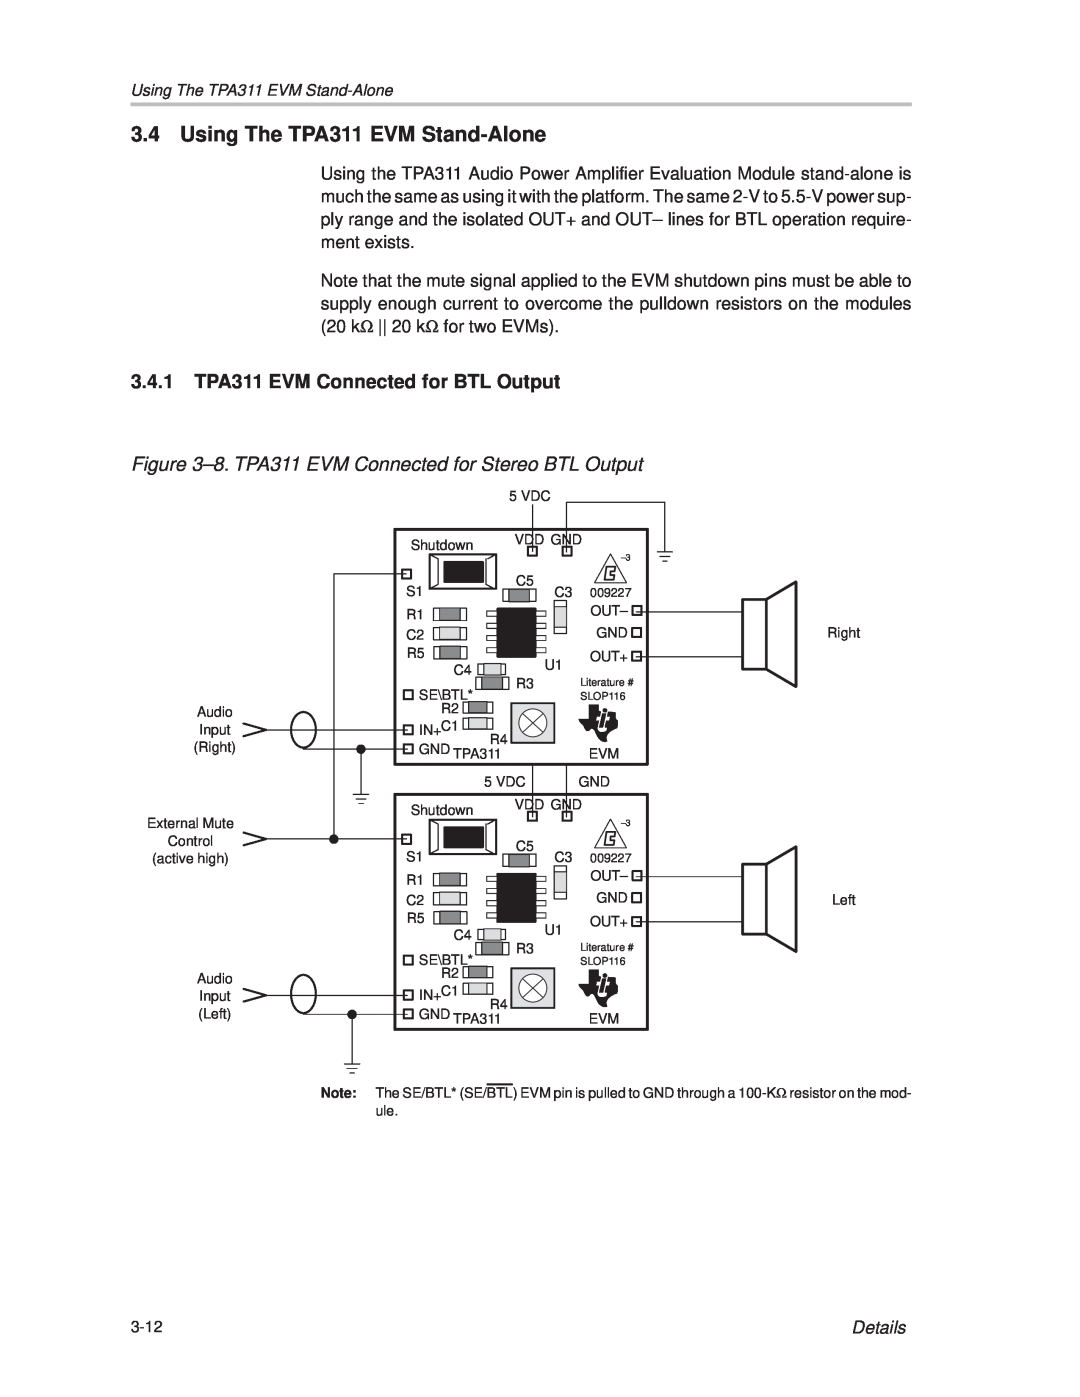 Texas Instruments TPA 311 manual Using The TPA311 EVM Stand-Alone, 3.4.1 TPA311 EVM Connected for BTL Output, Details 